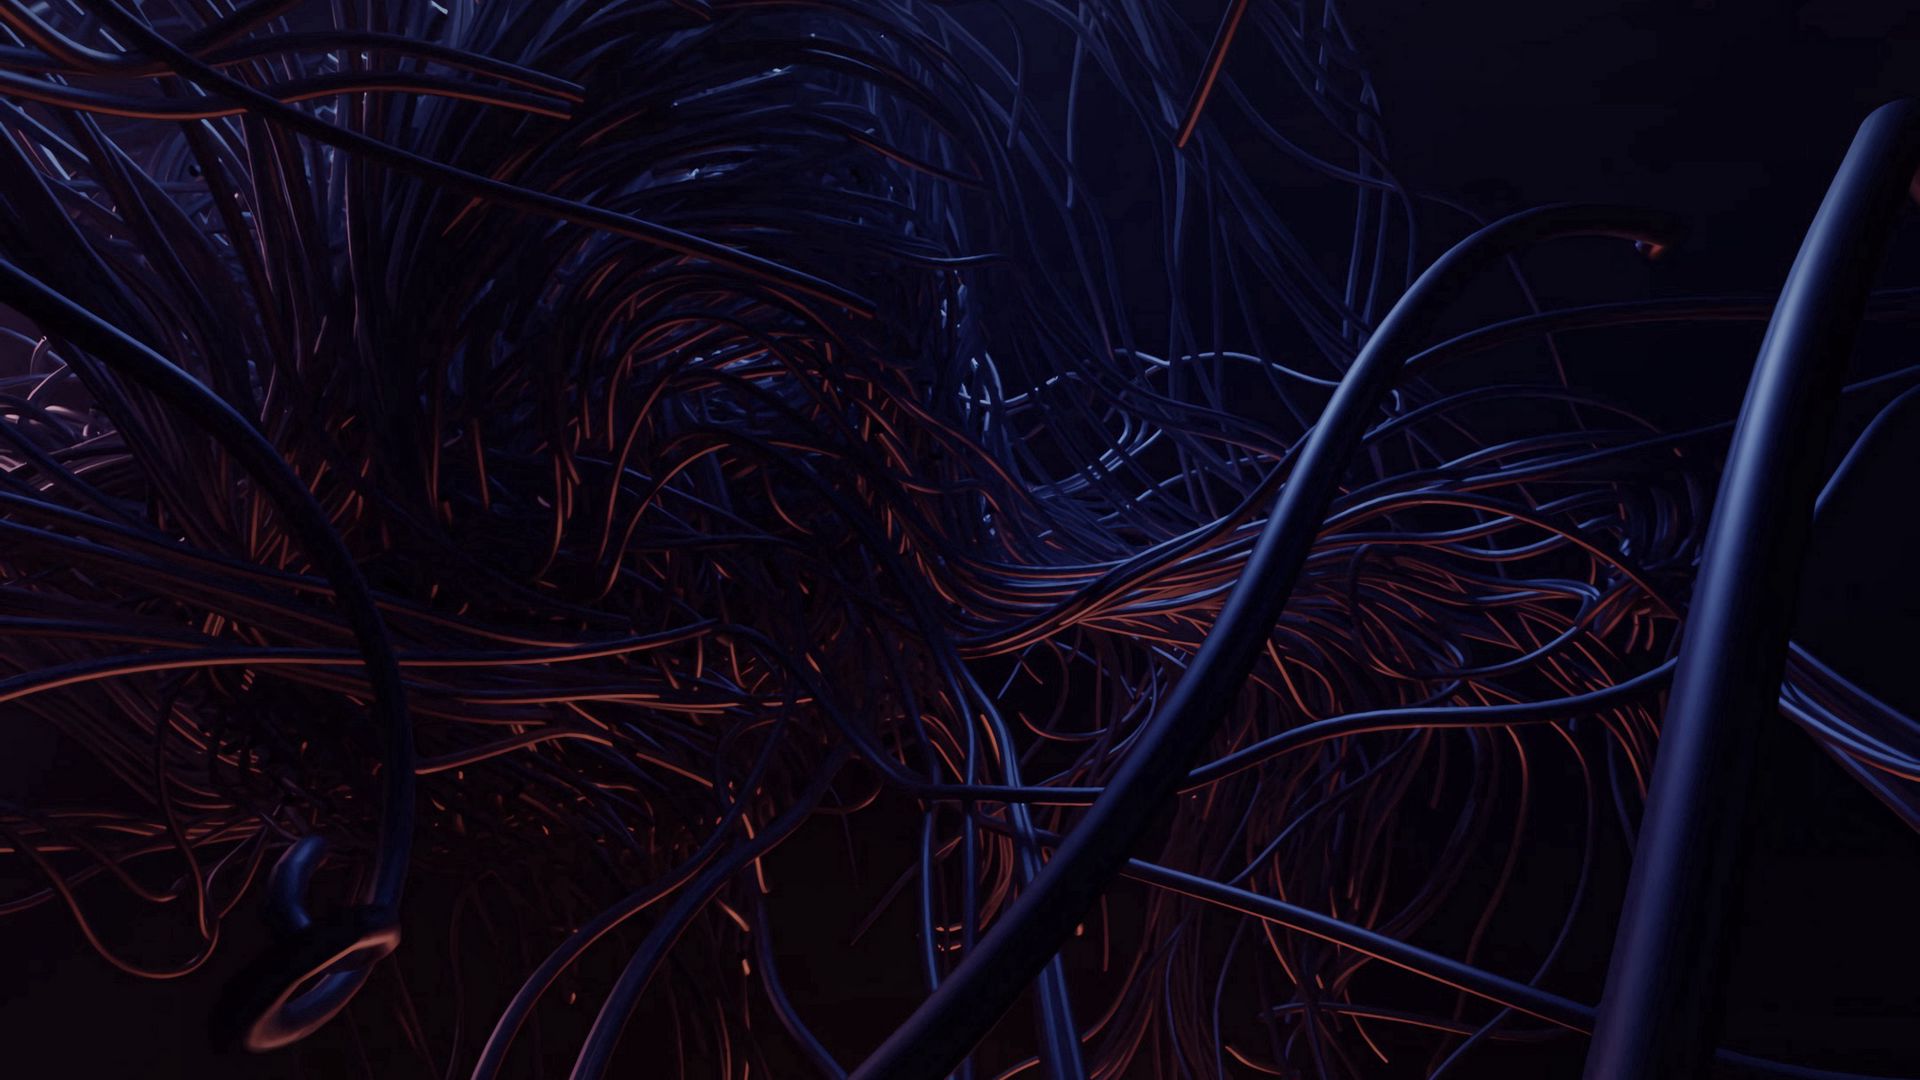 Download wallpaper 1920x1080 wires, tangled, dark, cables full hd, hdtv,  fhd, 1080p hd background